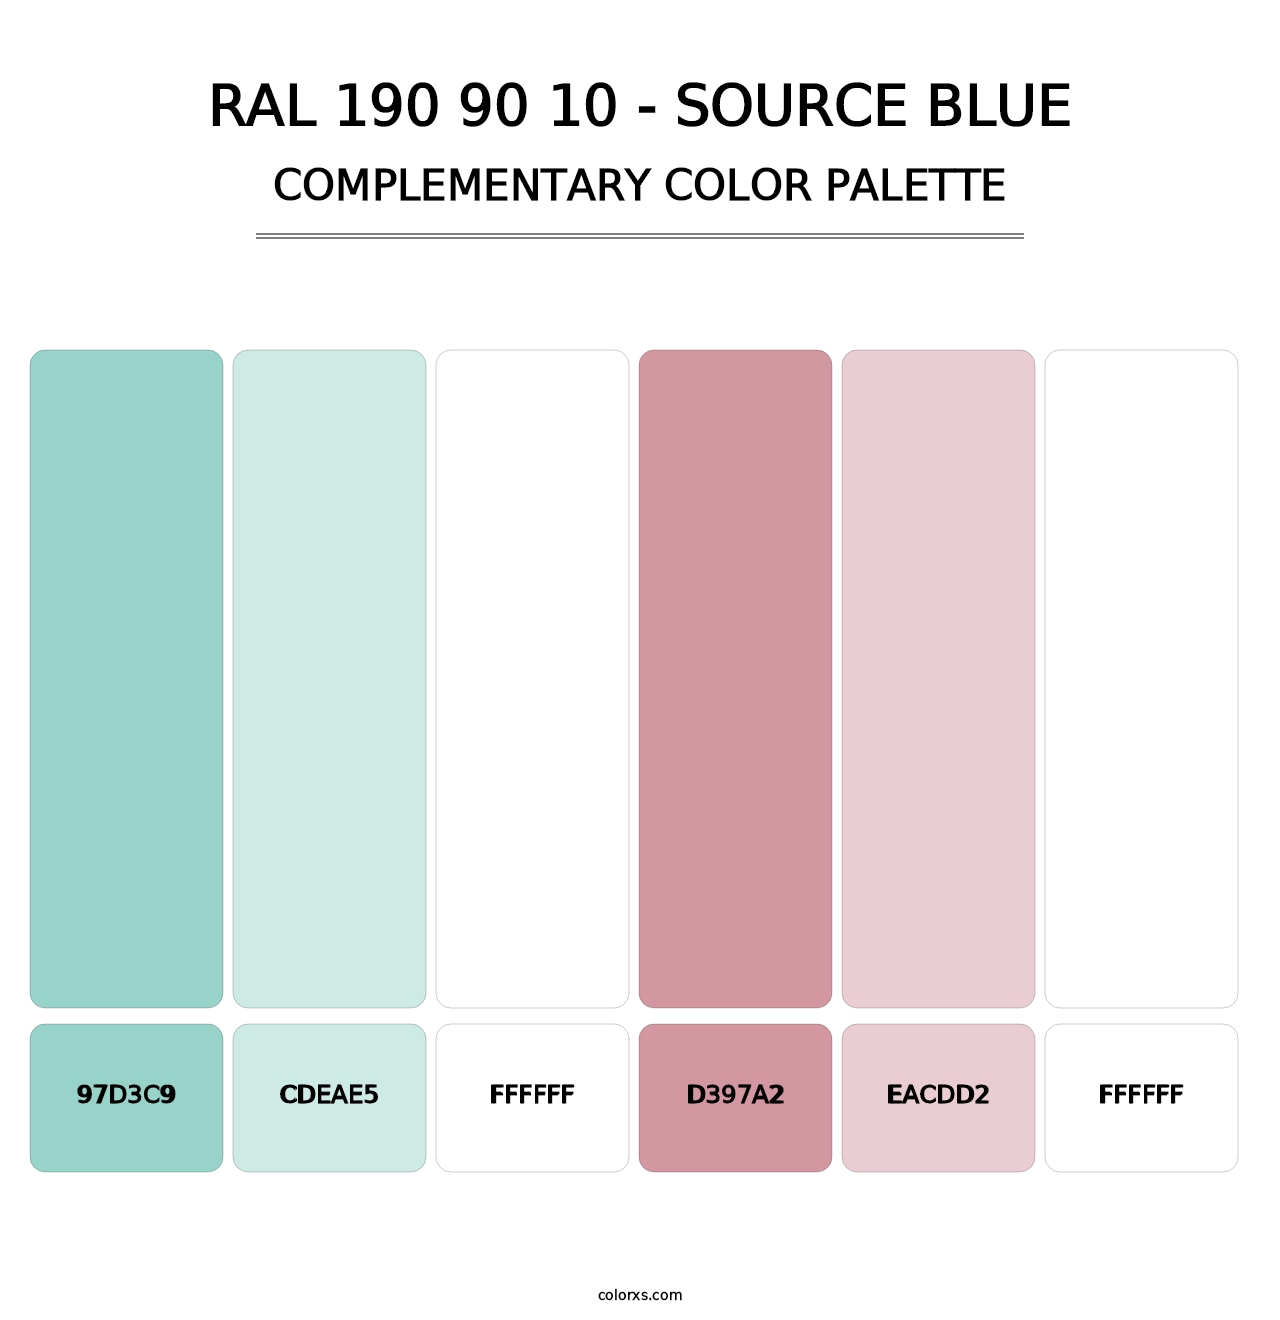 RAL 190 90 10 - Source Blue - Complementary Color Palette